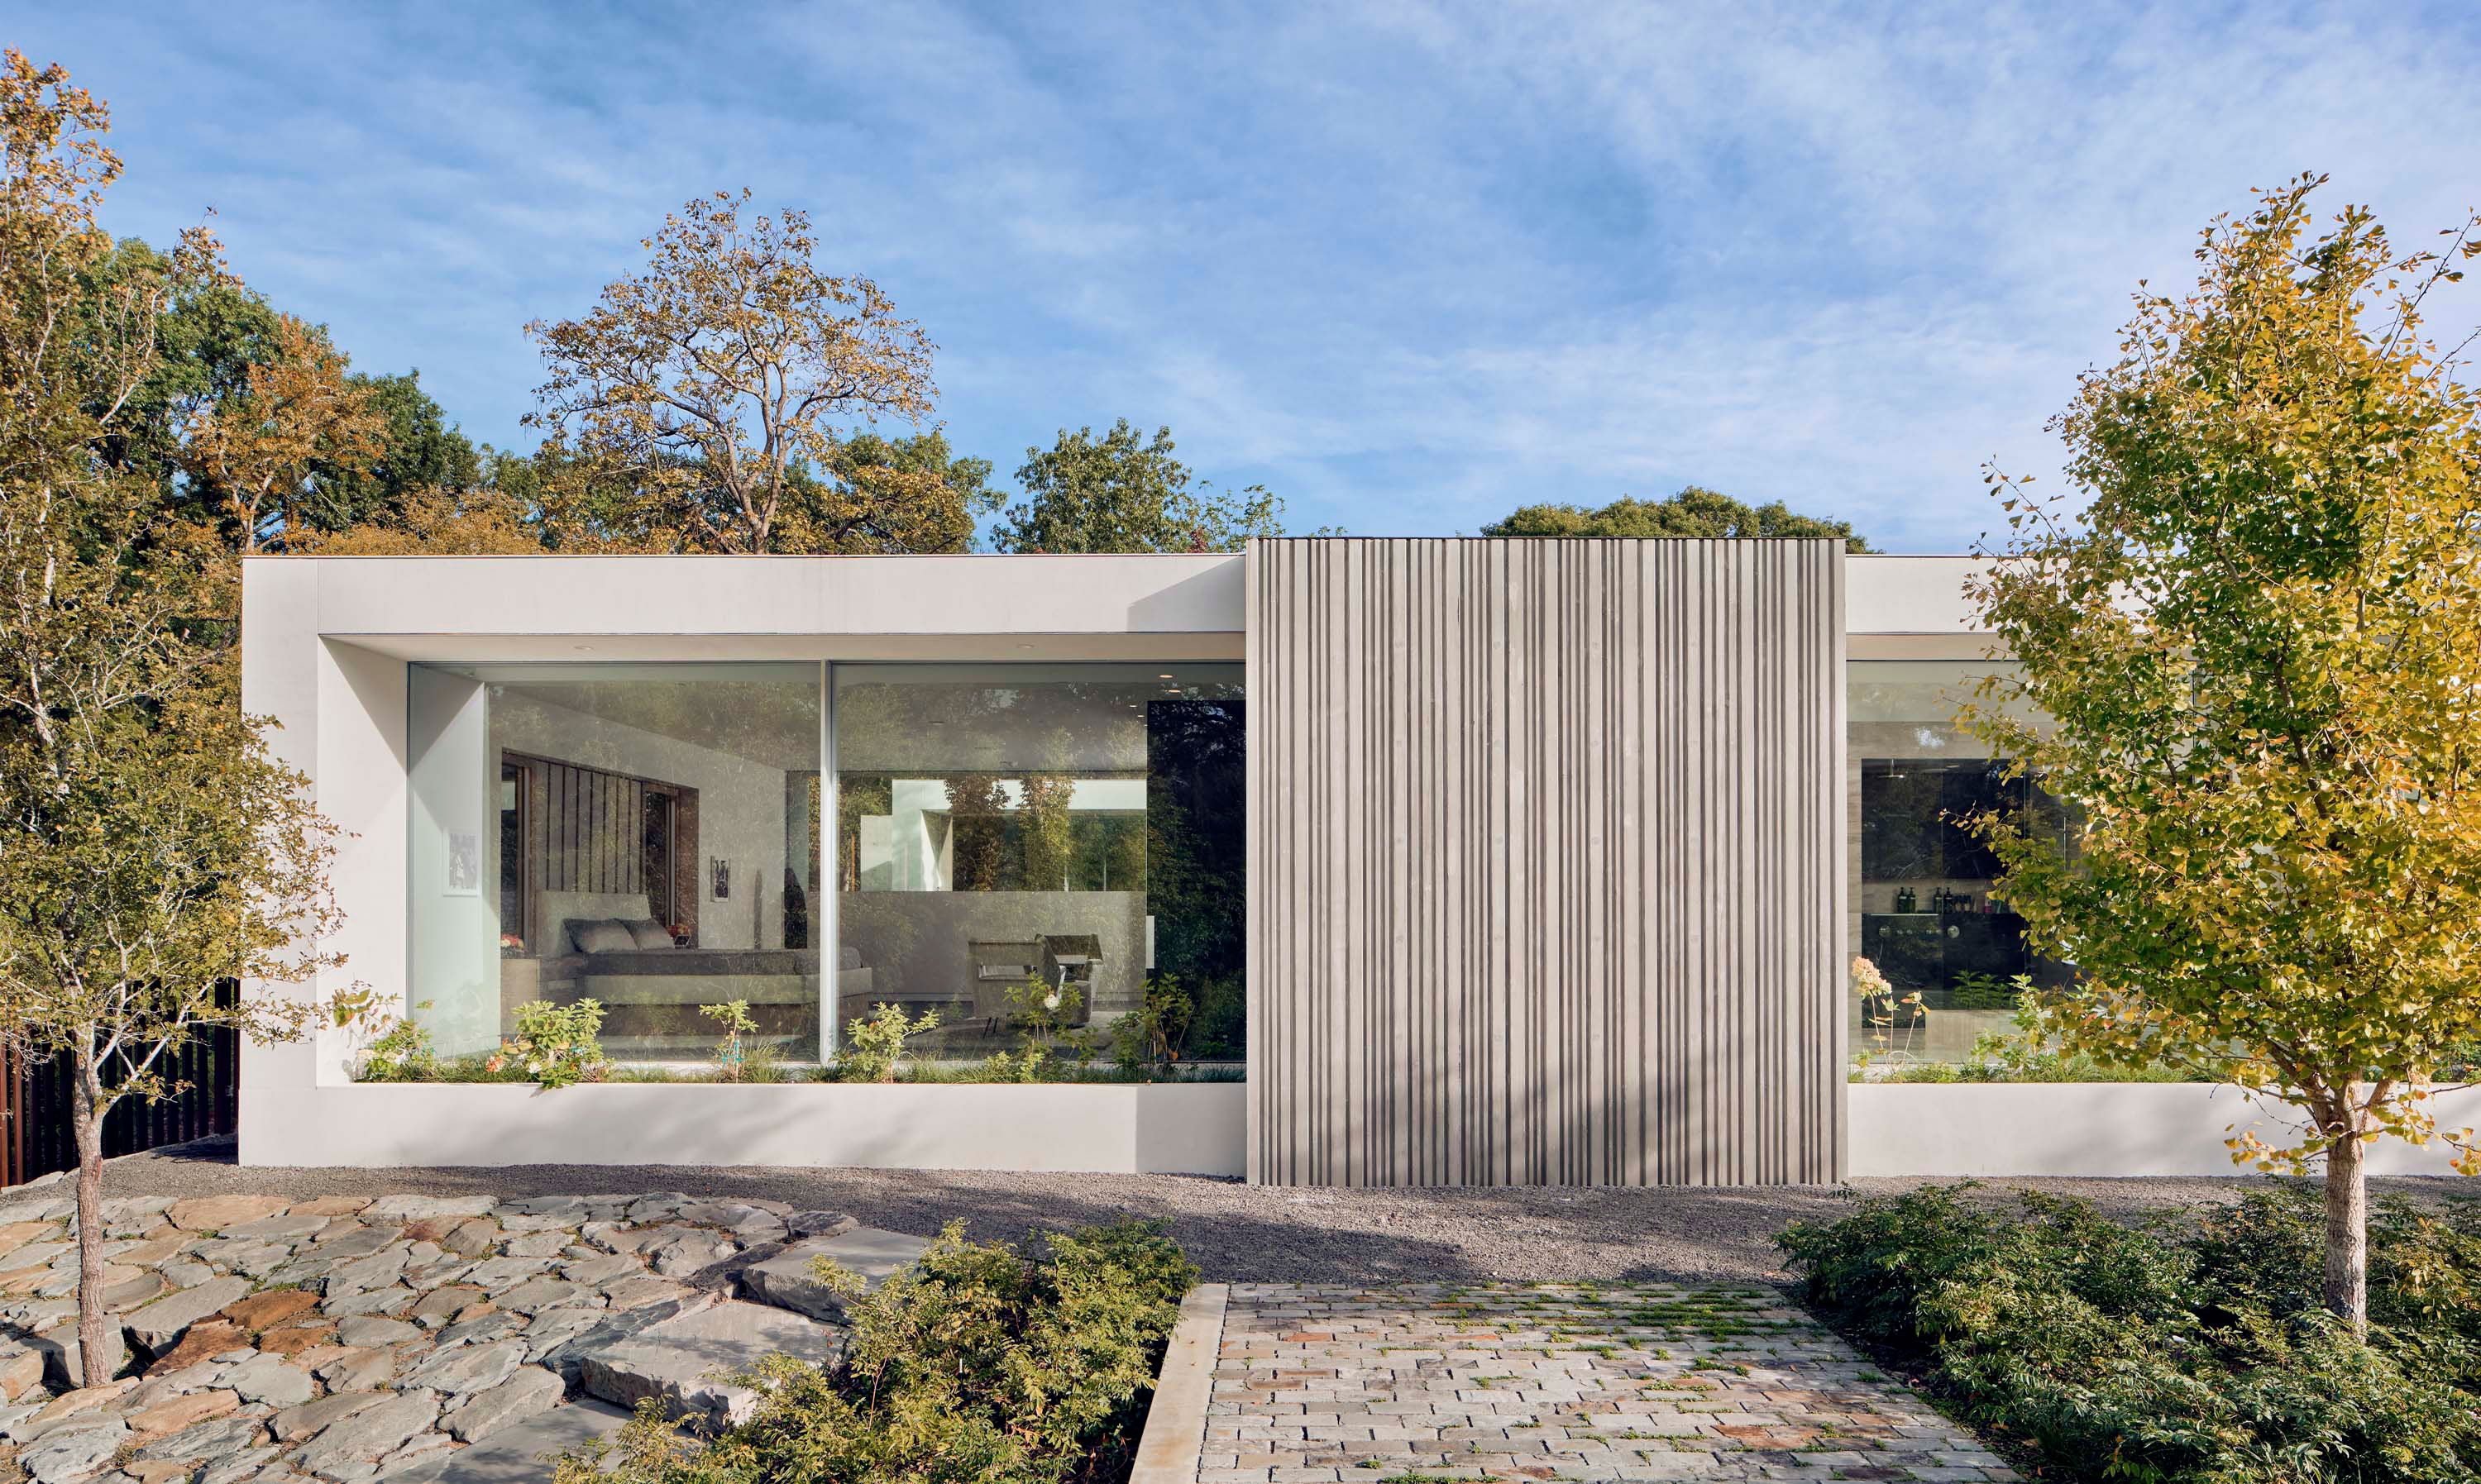 Exterior photo of the Preston Hollow Residence by Specht Novak Architects. Shot at by Manolo Langis, featuring the main bedroom, surrounding trees, and accent concrete wall.